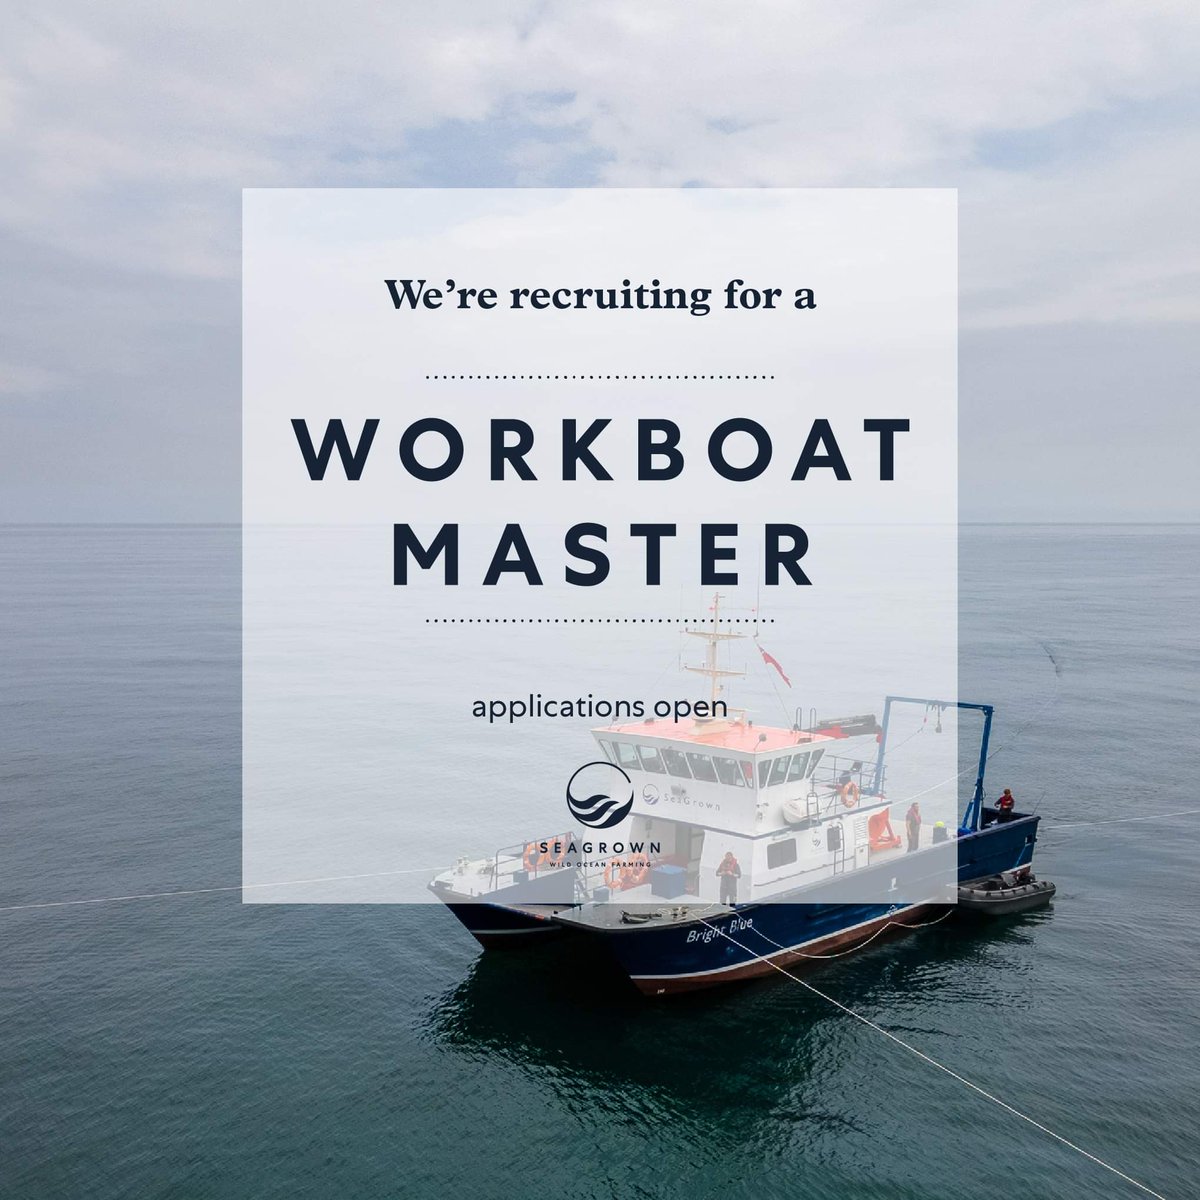 ~ CAREER OPPORTUNITY ~ We are looking for a motivated, proactive Workboat Master to join our team at a forward-looking sustainable seaweed company located on the North Yorkshire Coast. More details: adobe.ly/3RJ3l5M #WildOceanFarming